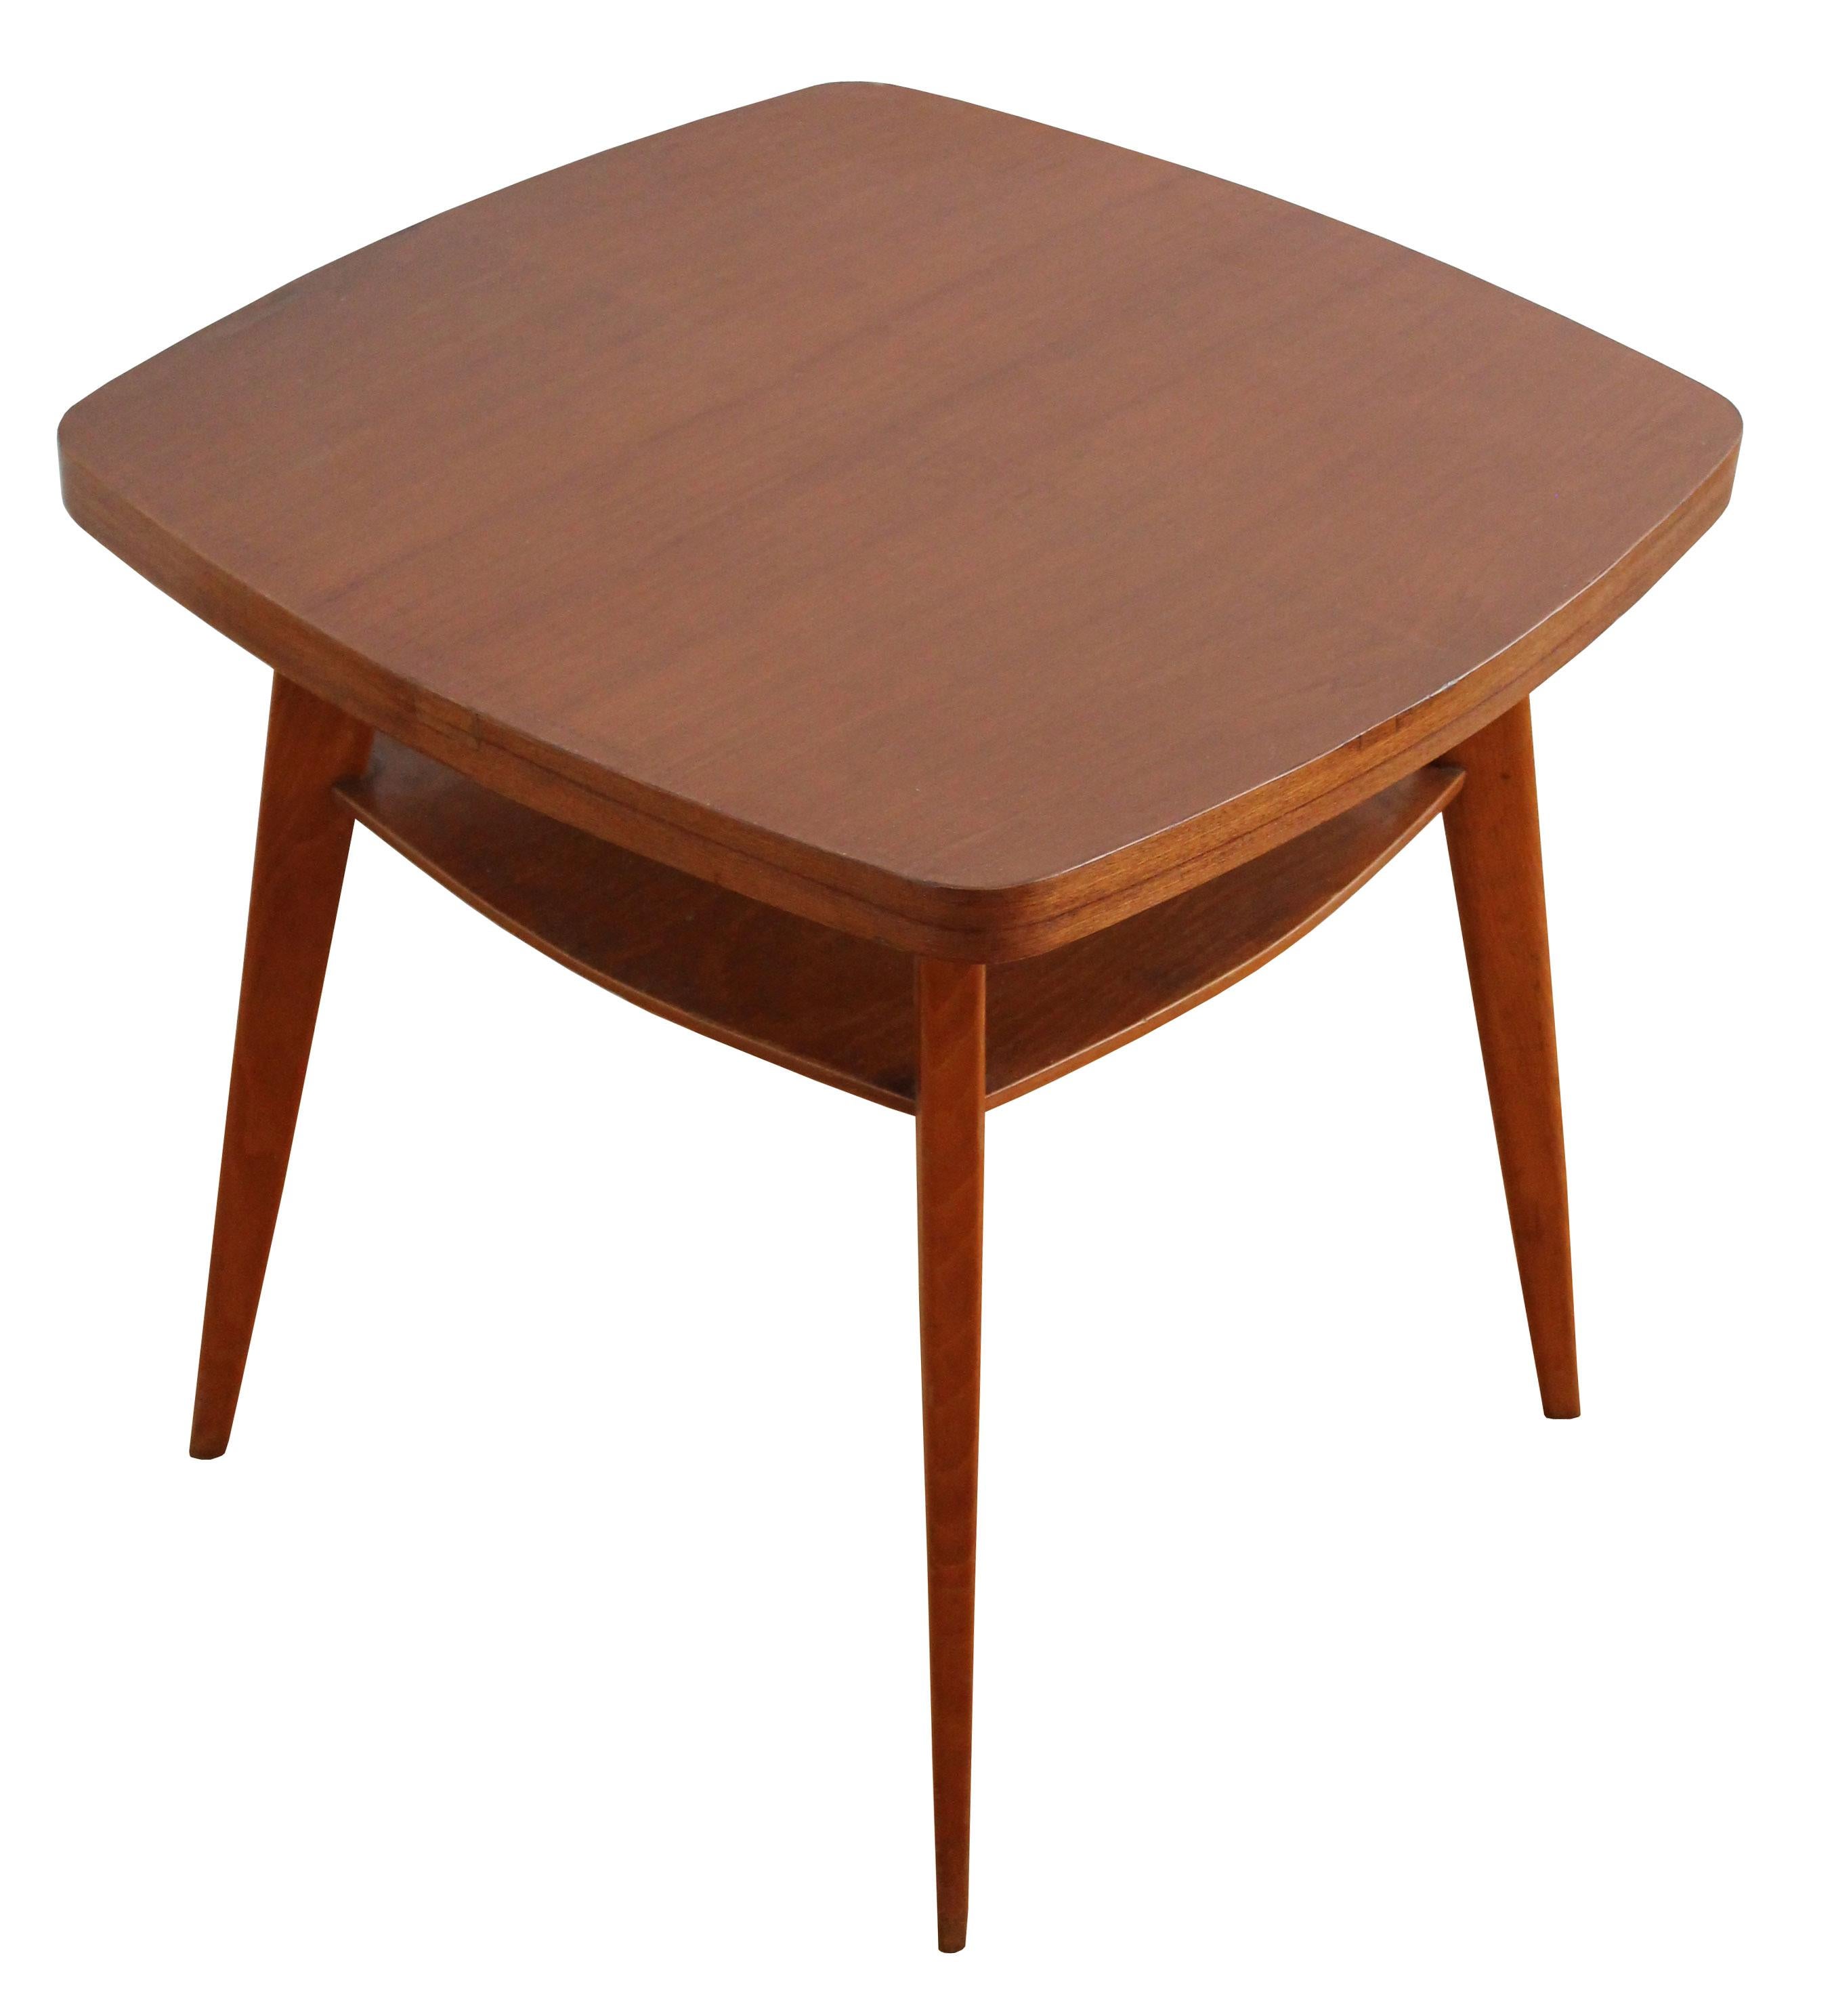 A Mid Century coffee table produced by the Mier Factory in the 1960’s. This piece was clearly influenced by the soft organic shapes typical of Scandinavian furniture design, however it was designed and produced in former Czechoslovakia. 

The table